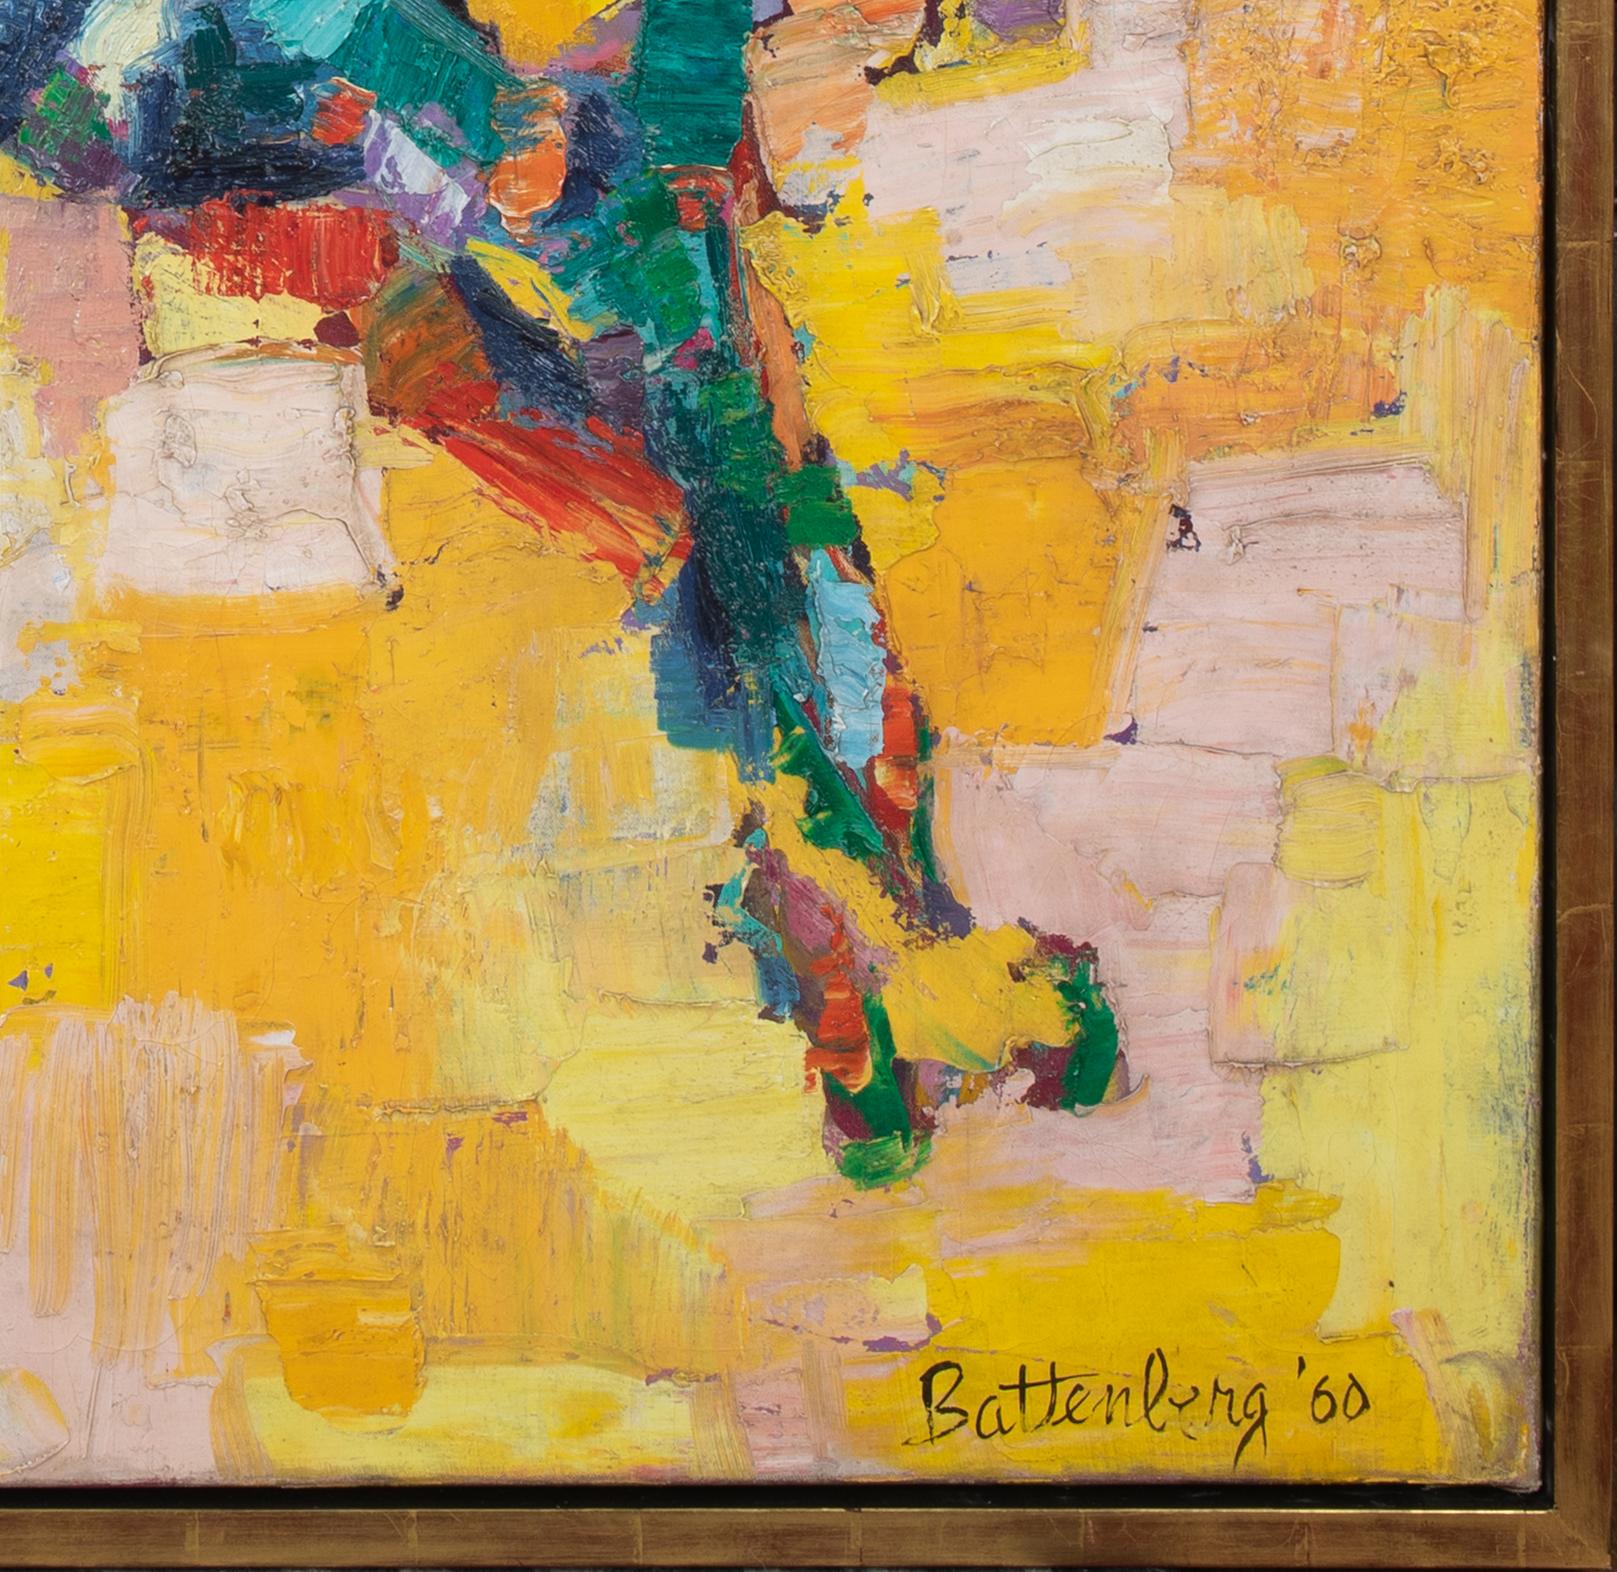 Portrait Of A Boxer Dog, dated 1960

John Battenberg (1936-2013) New York Abstract Painter

Large 1960 American Abstract portrait of a Boxer Dog, oil on canvas by John Battenberg. Excellent quality and condition study of the dog and a leading